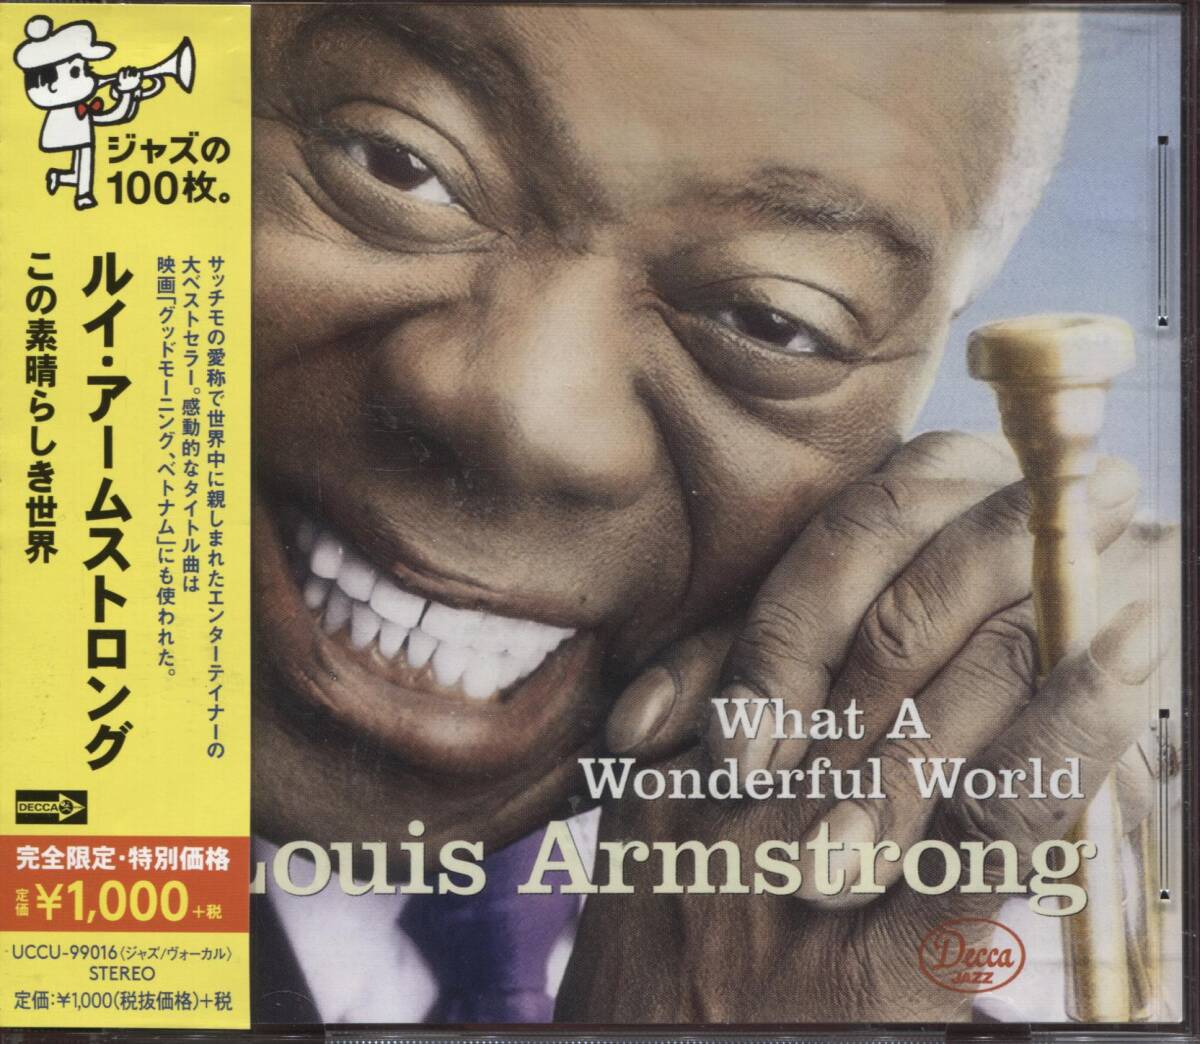  Louis * Armstrong [ that element .... world ]